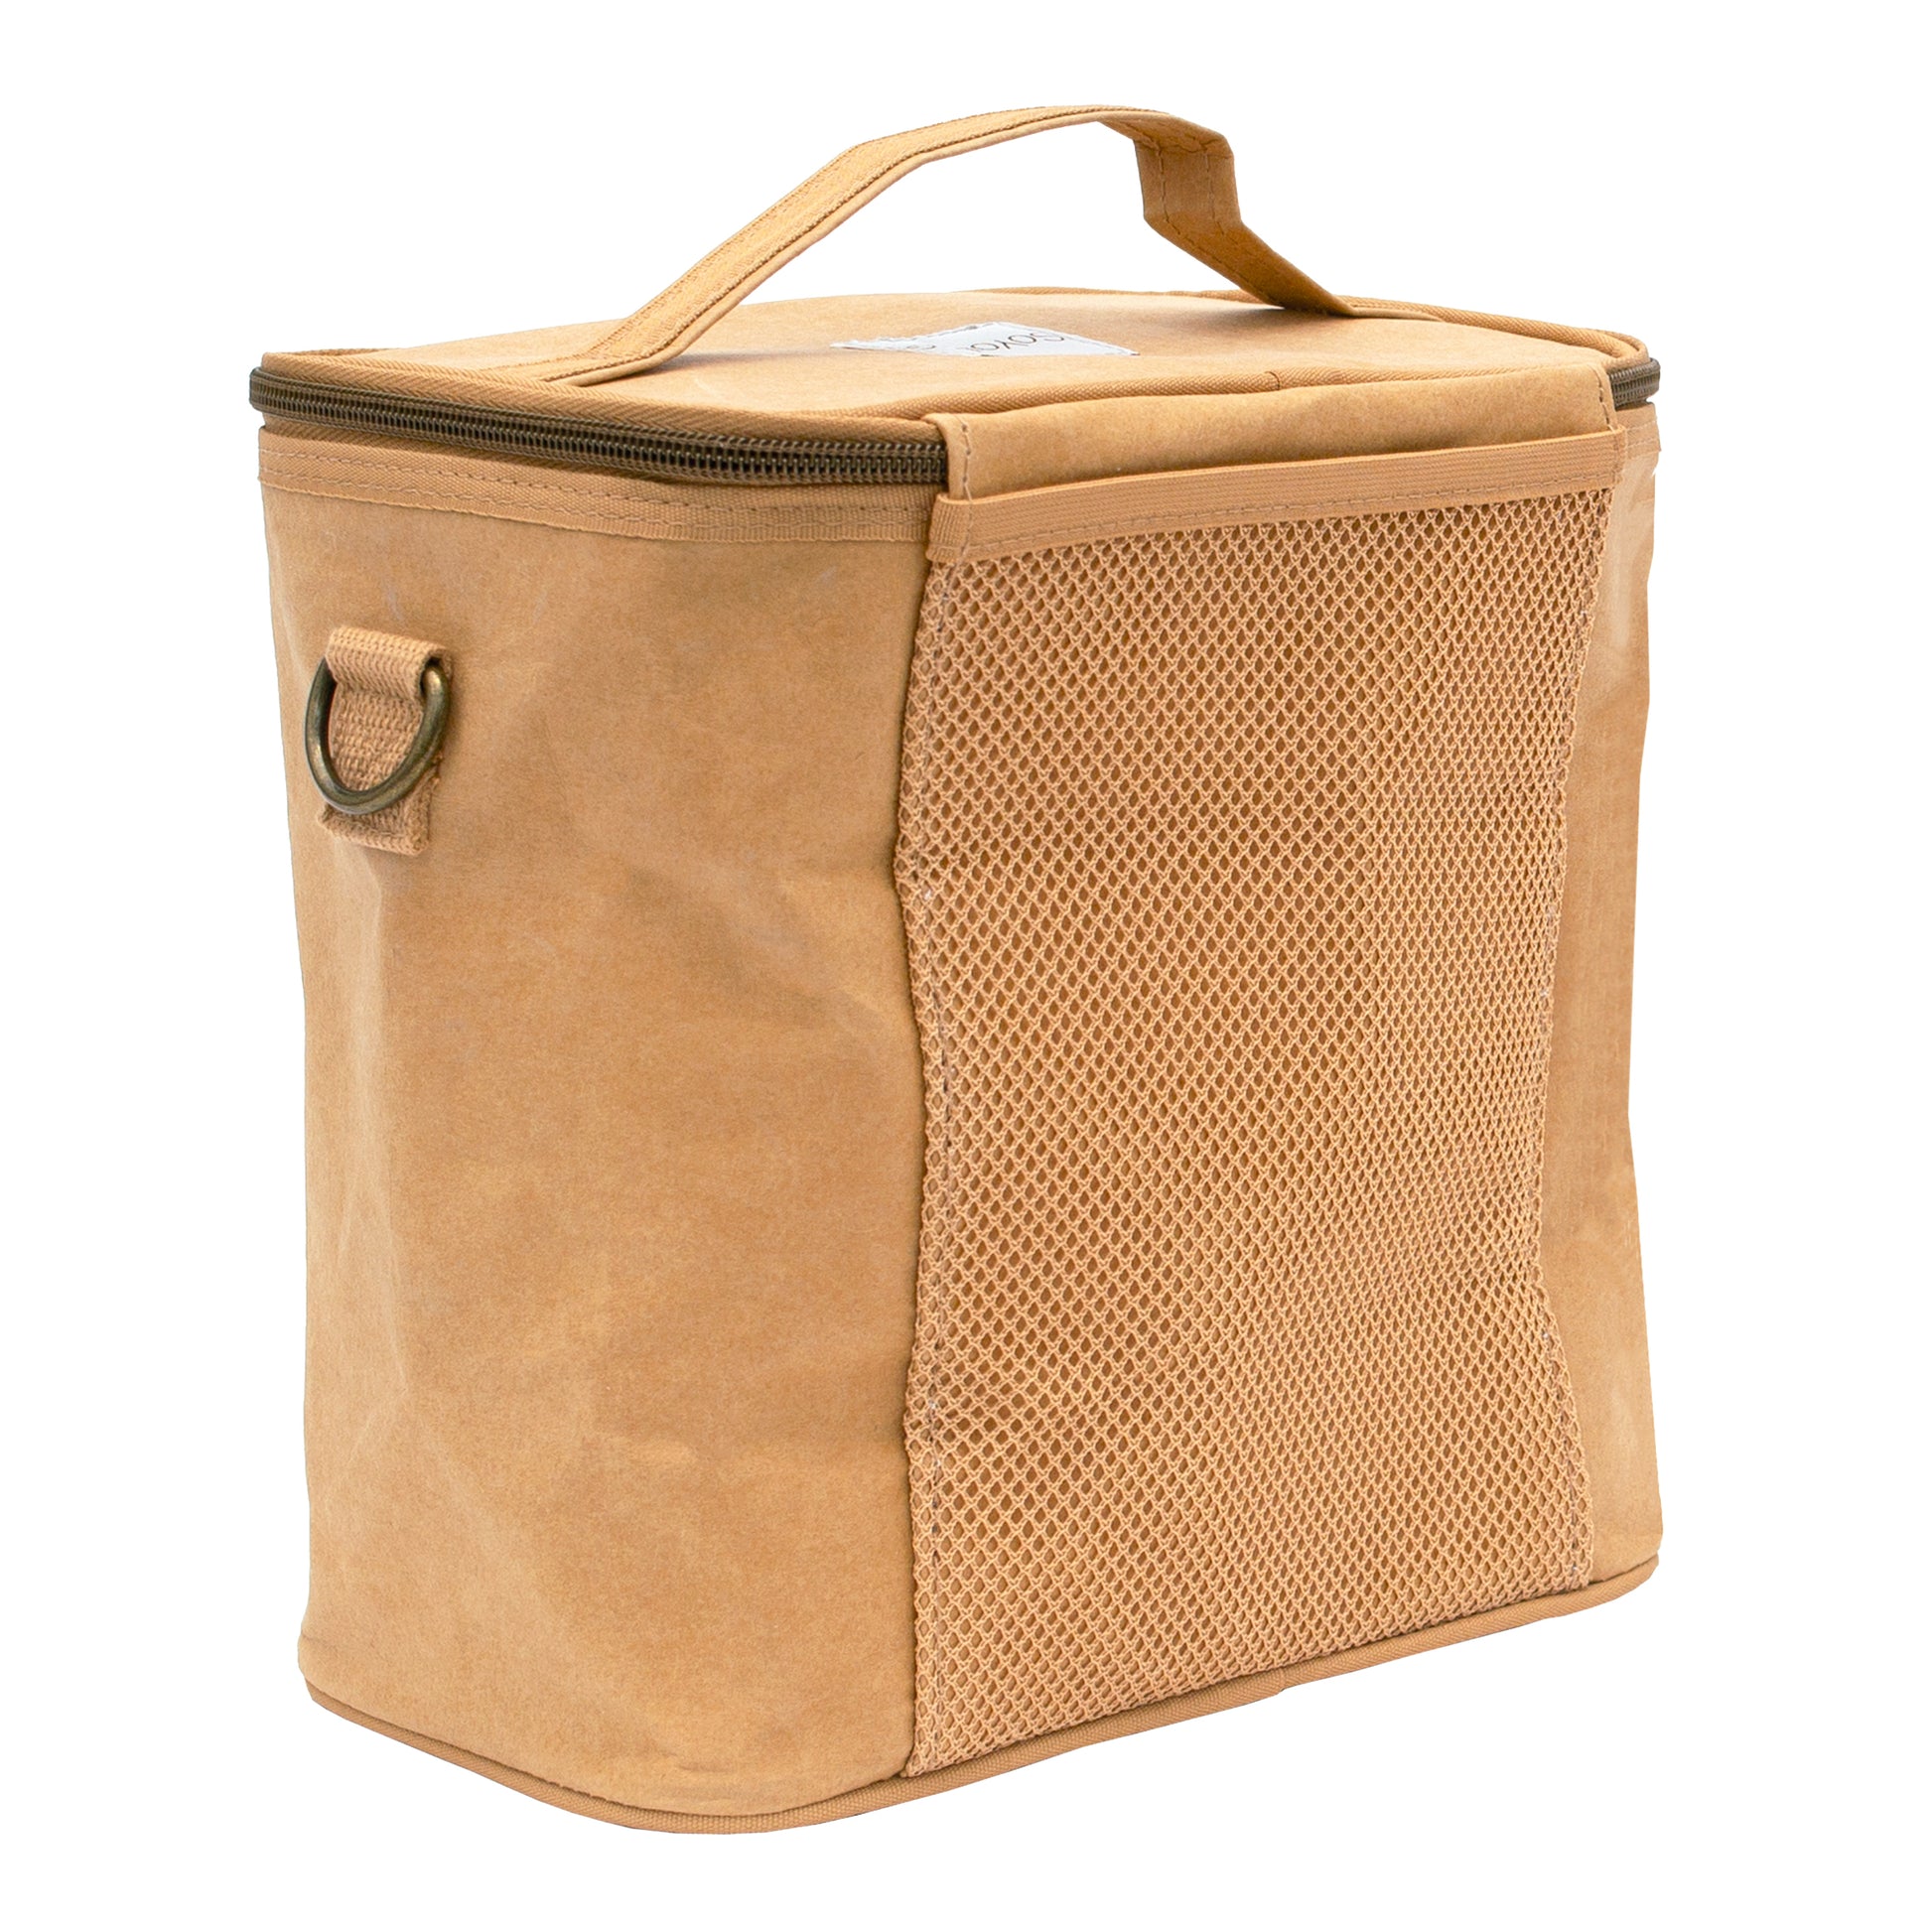 SoYoung Insulated Lunch Bag Kraft Paper Singapore